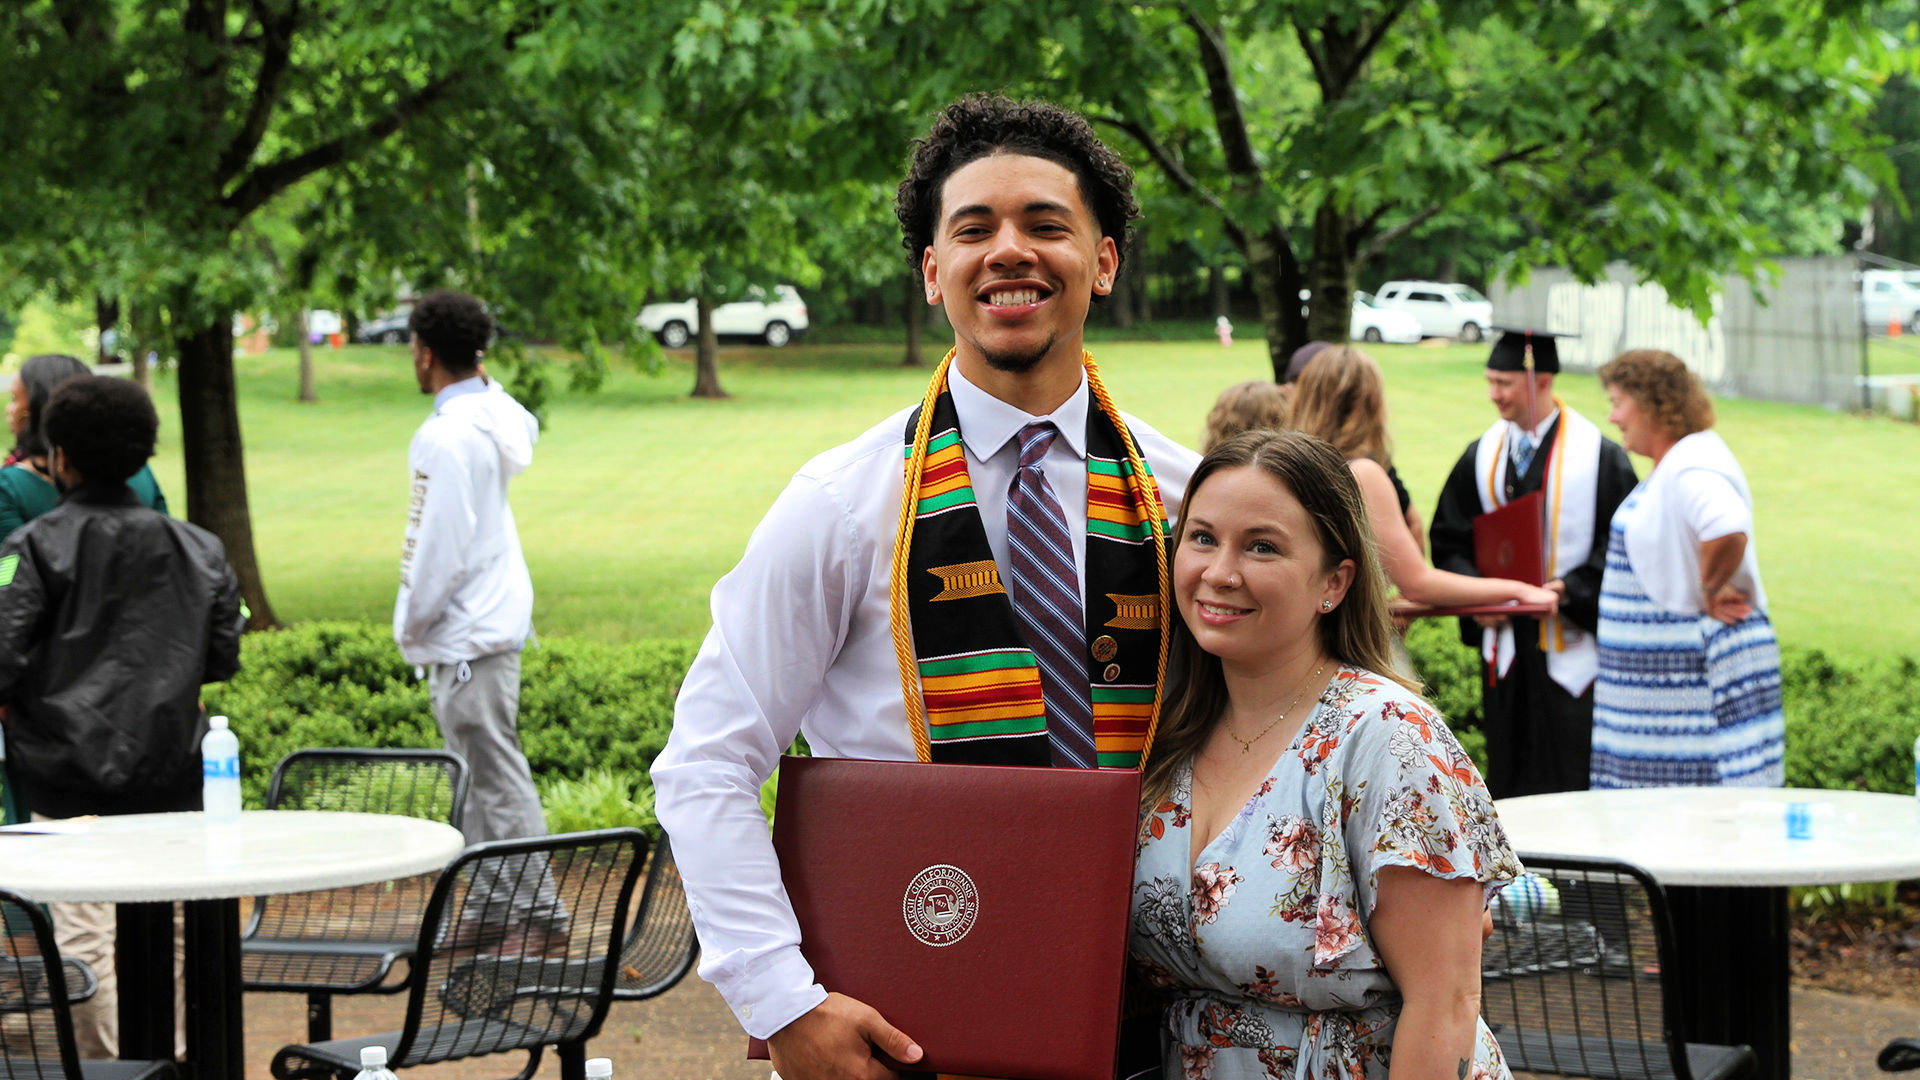 A smiling graduate takes a photo with a friend outdoors after Commencement.